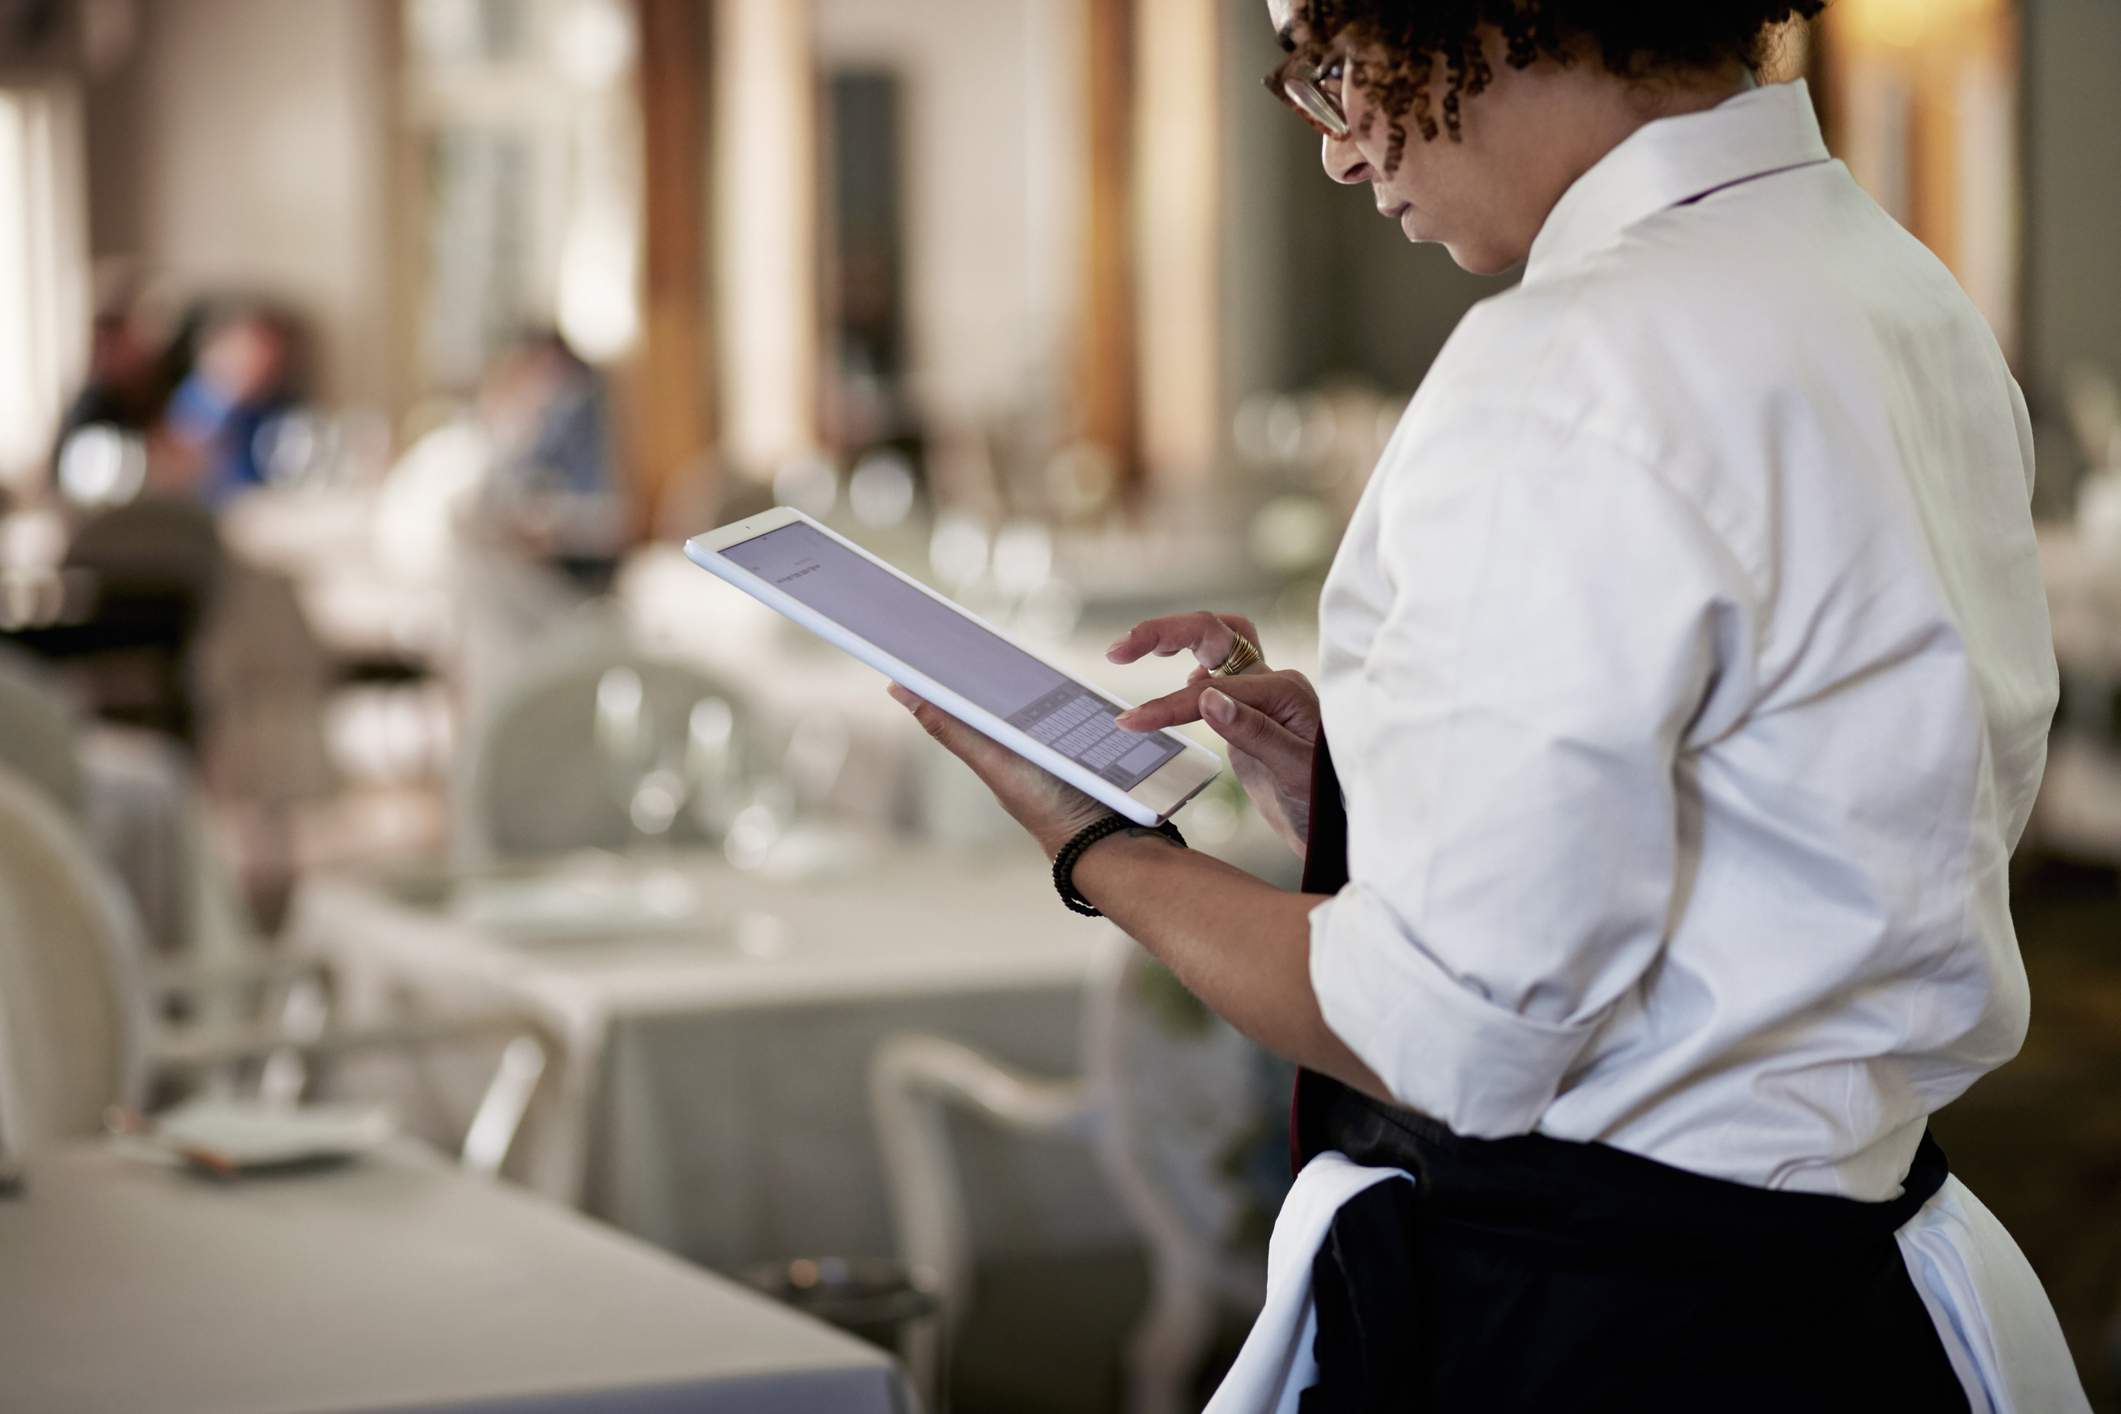 Image depicts a server wearing a white button down and black apron using a tablet inside of a restaurant. 